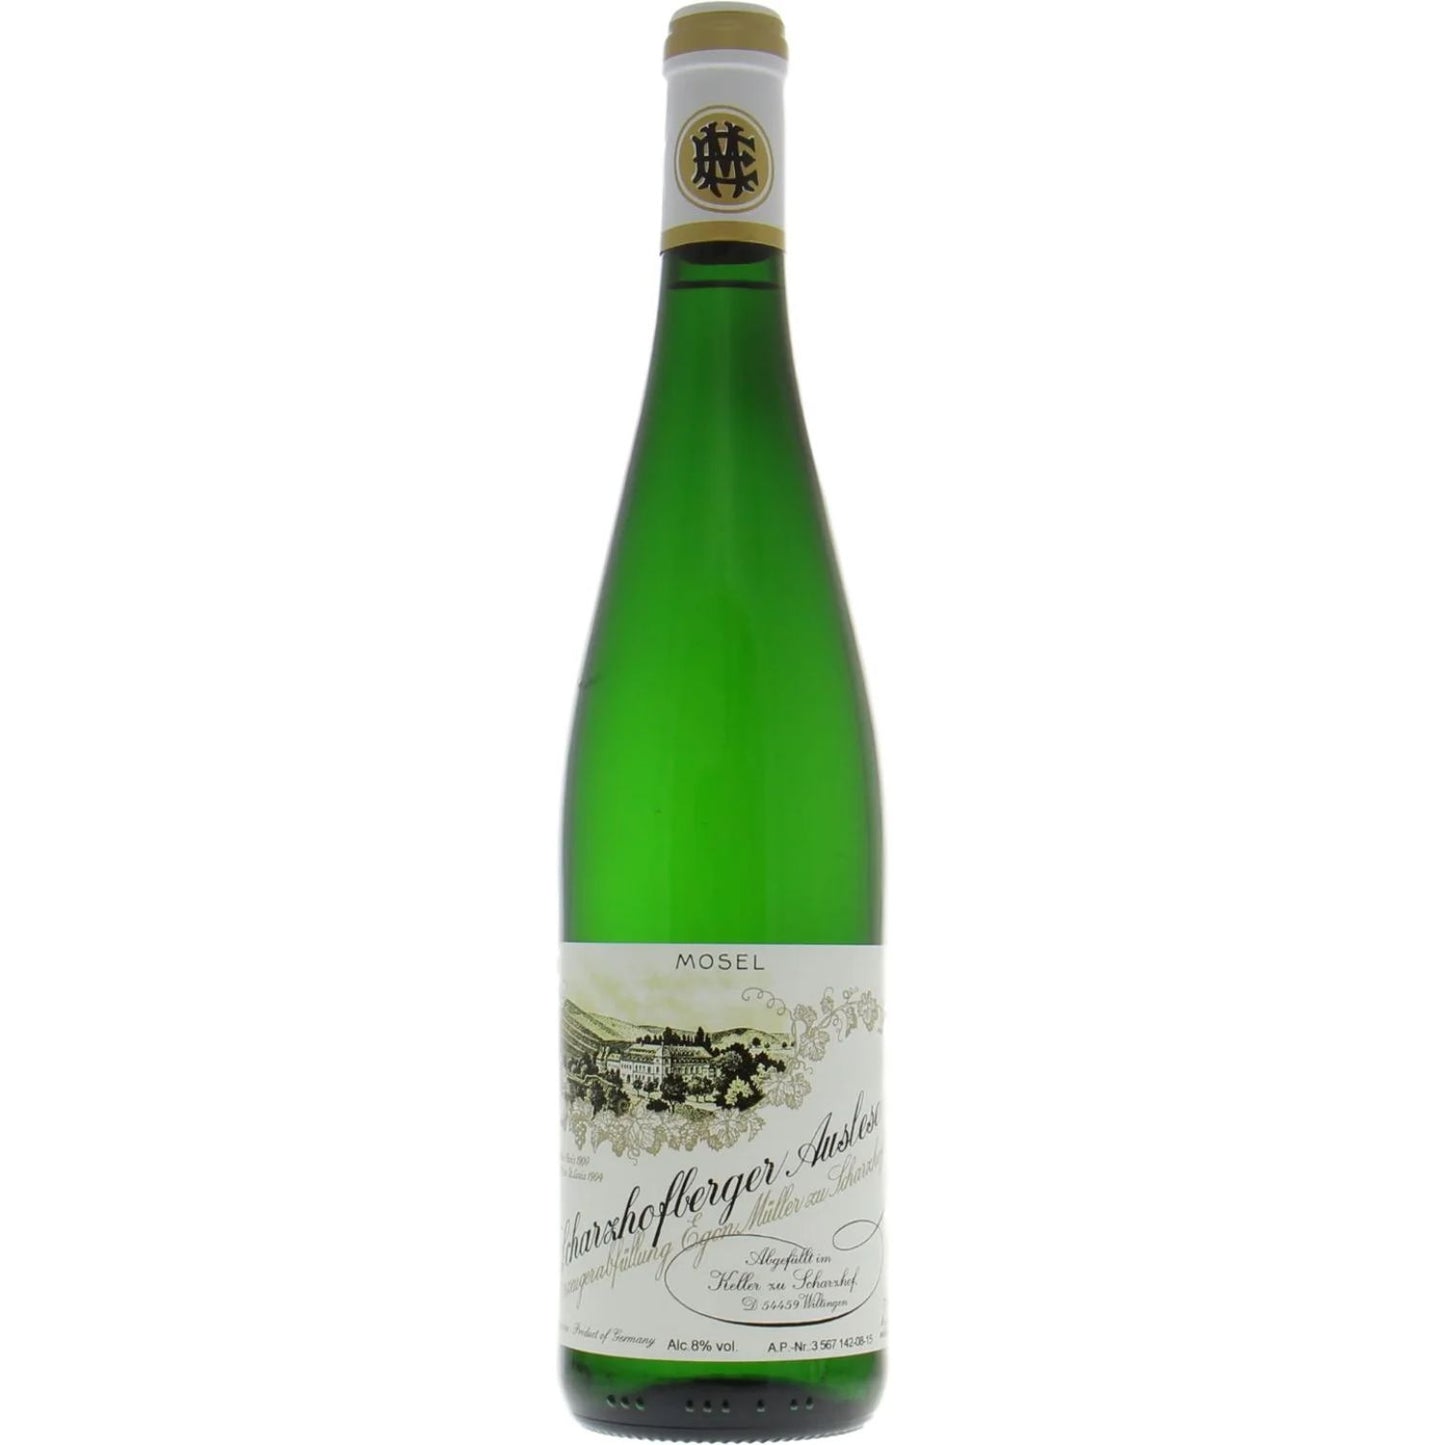 Egon Muller: Mosel Scharzhofberger Riesling Auslese 2015